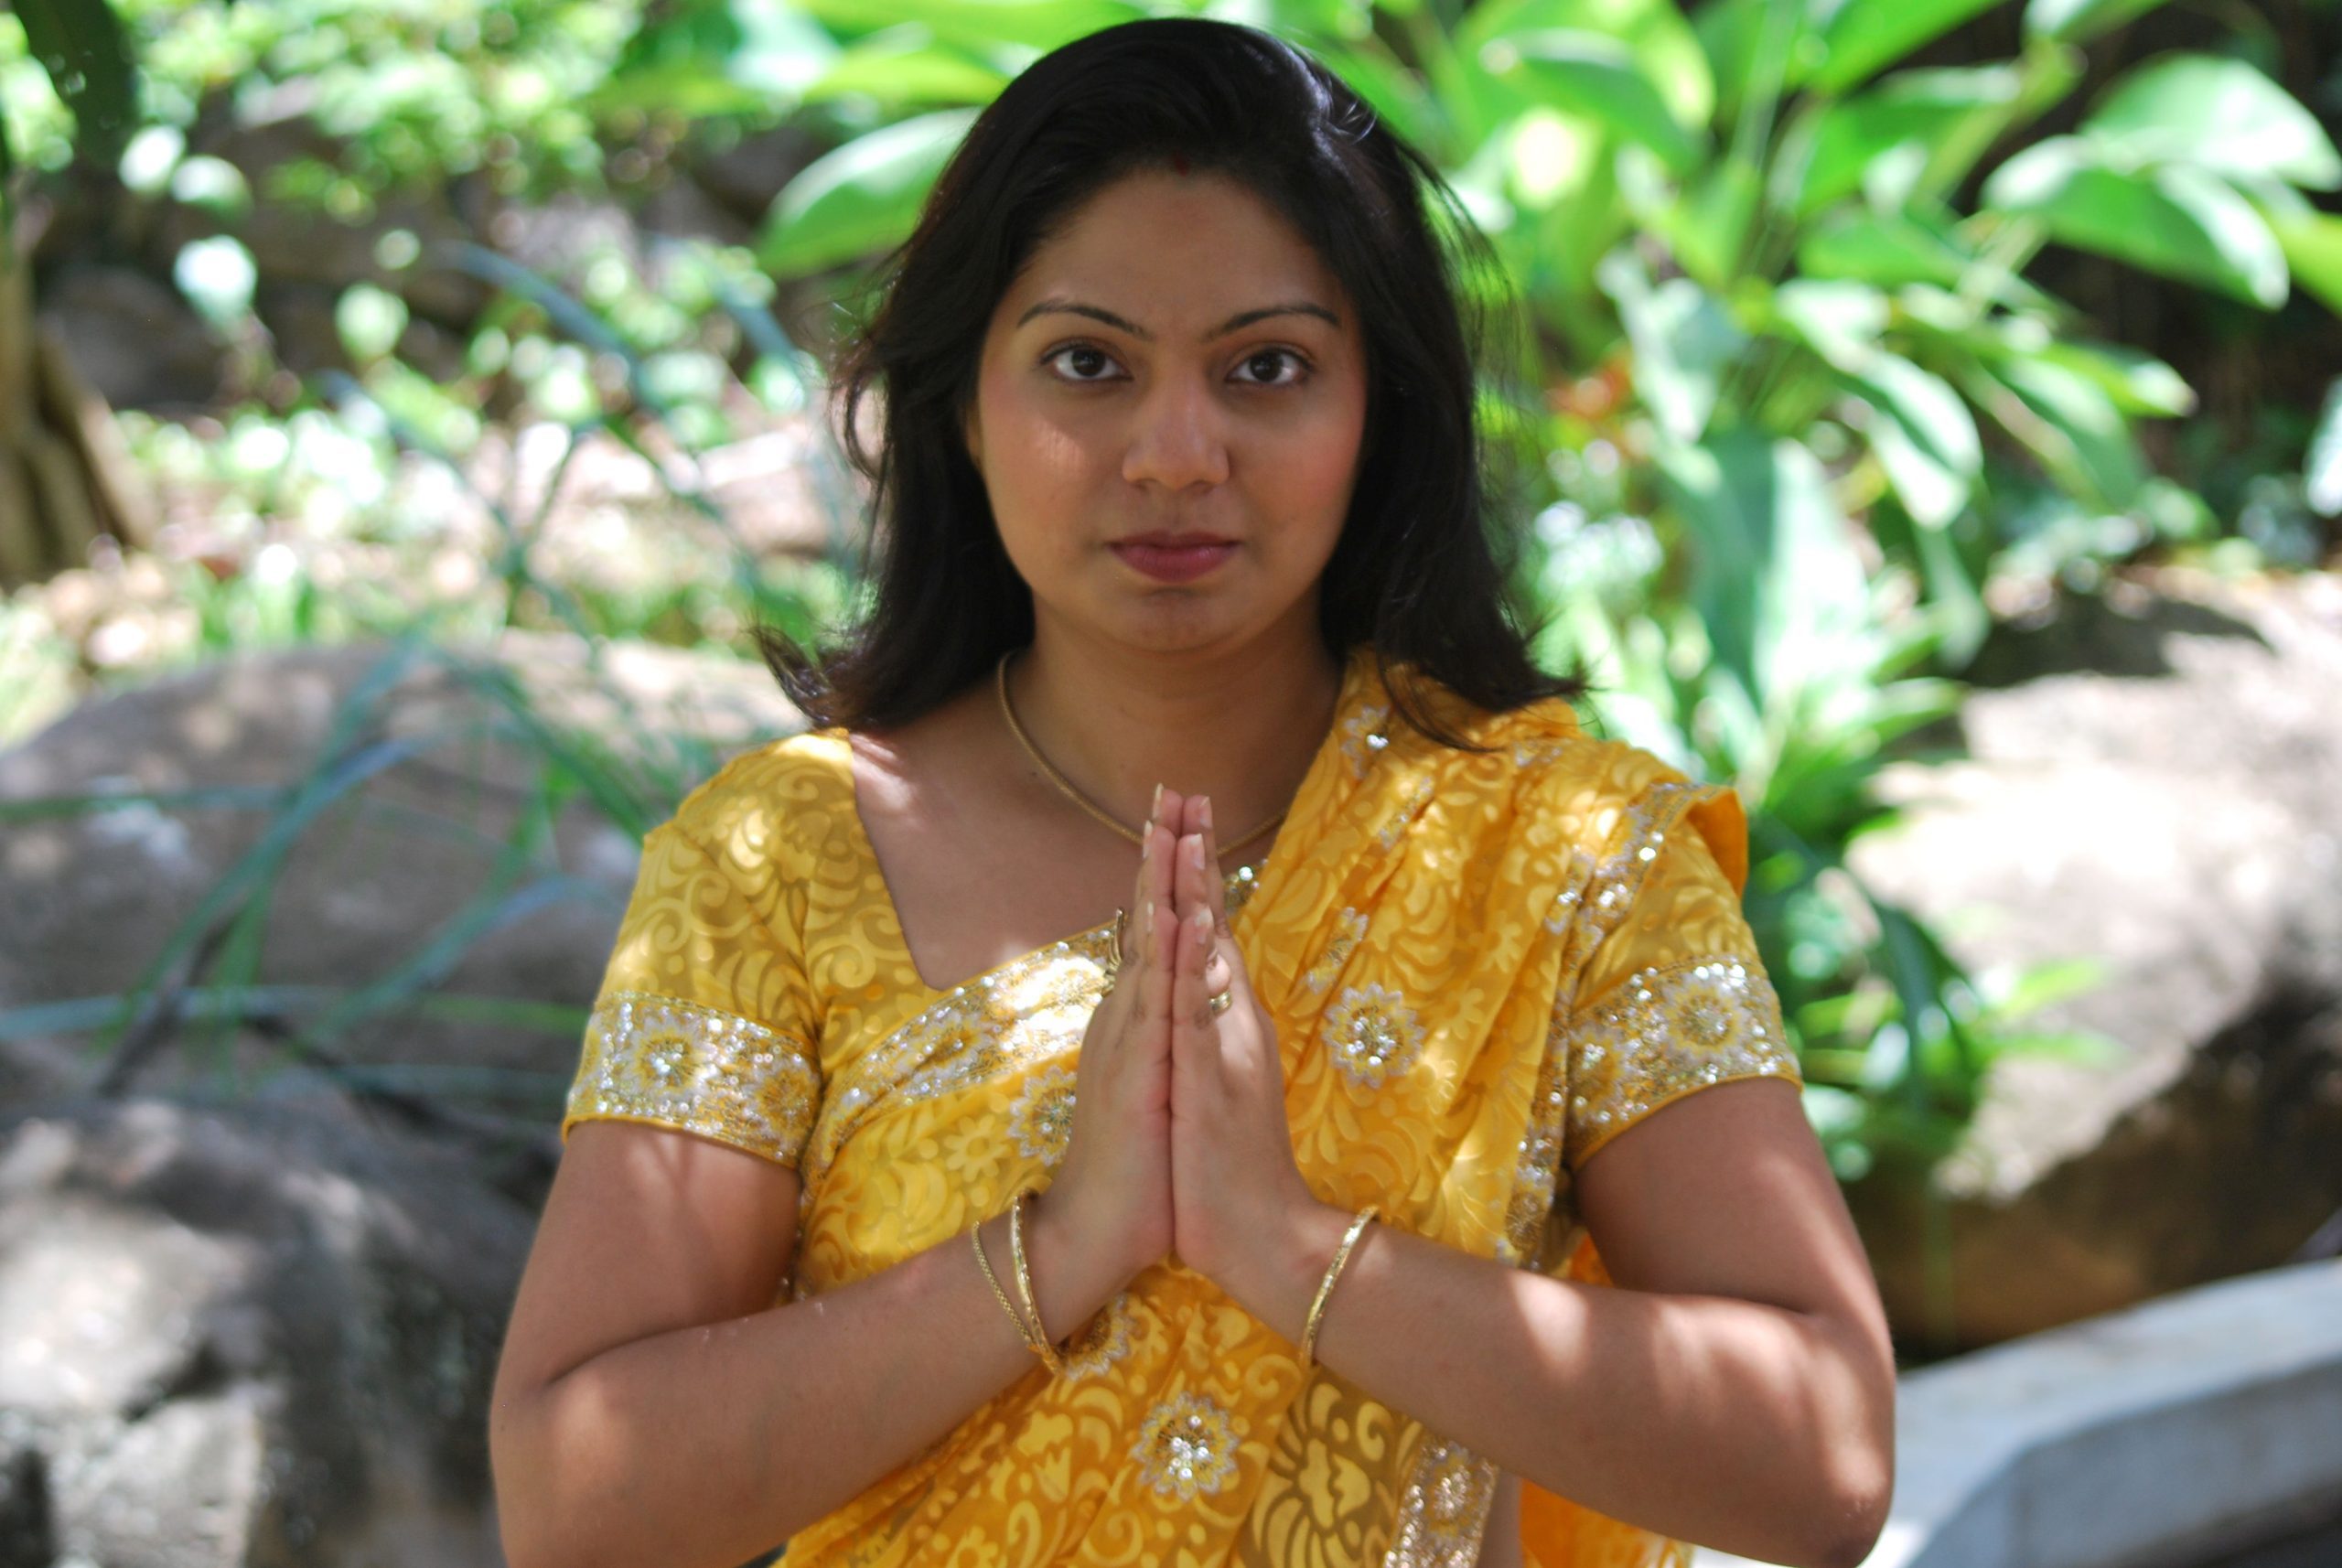 An Indian woman standing in a Womb Yoga pose, with their extended arms like a namaste